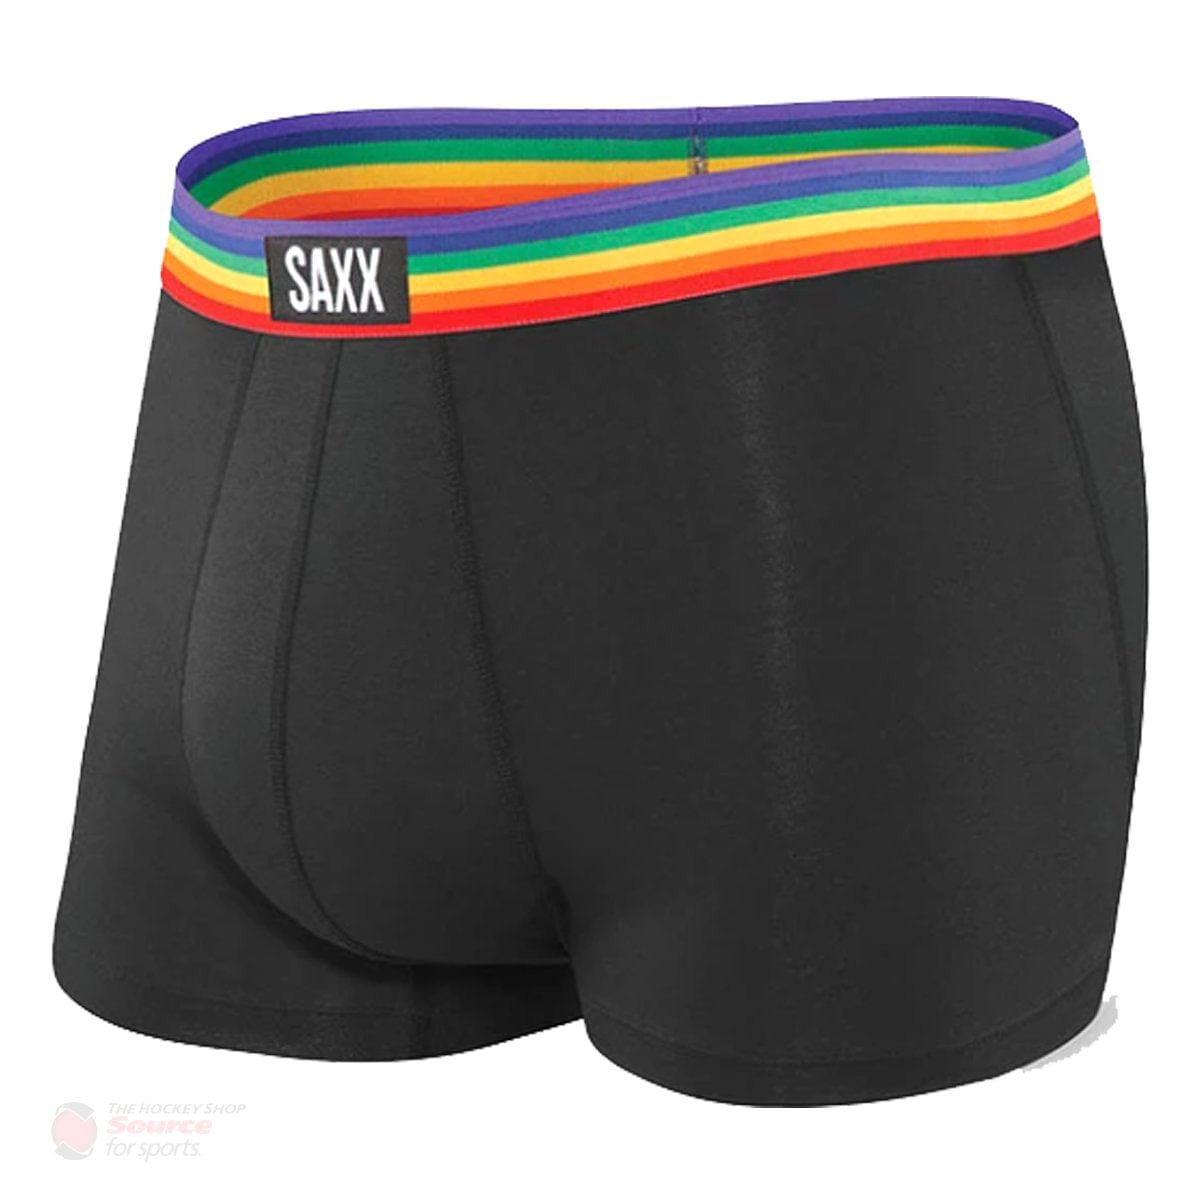 Saxx Undercover Boxers - Black Rainbow (Trunk Fit)